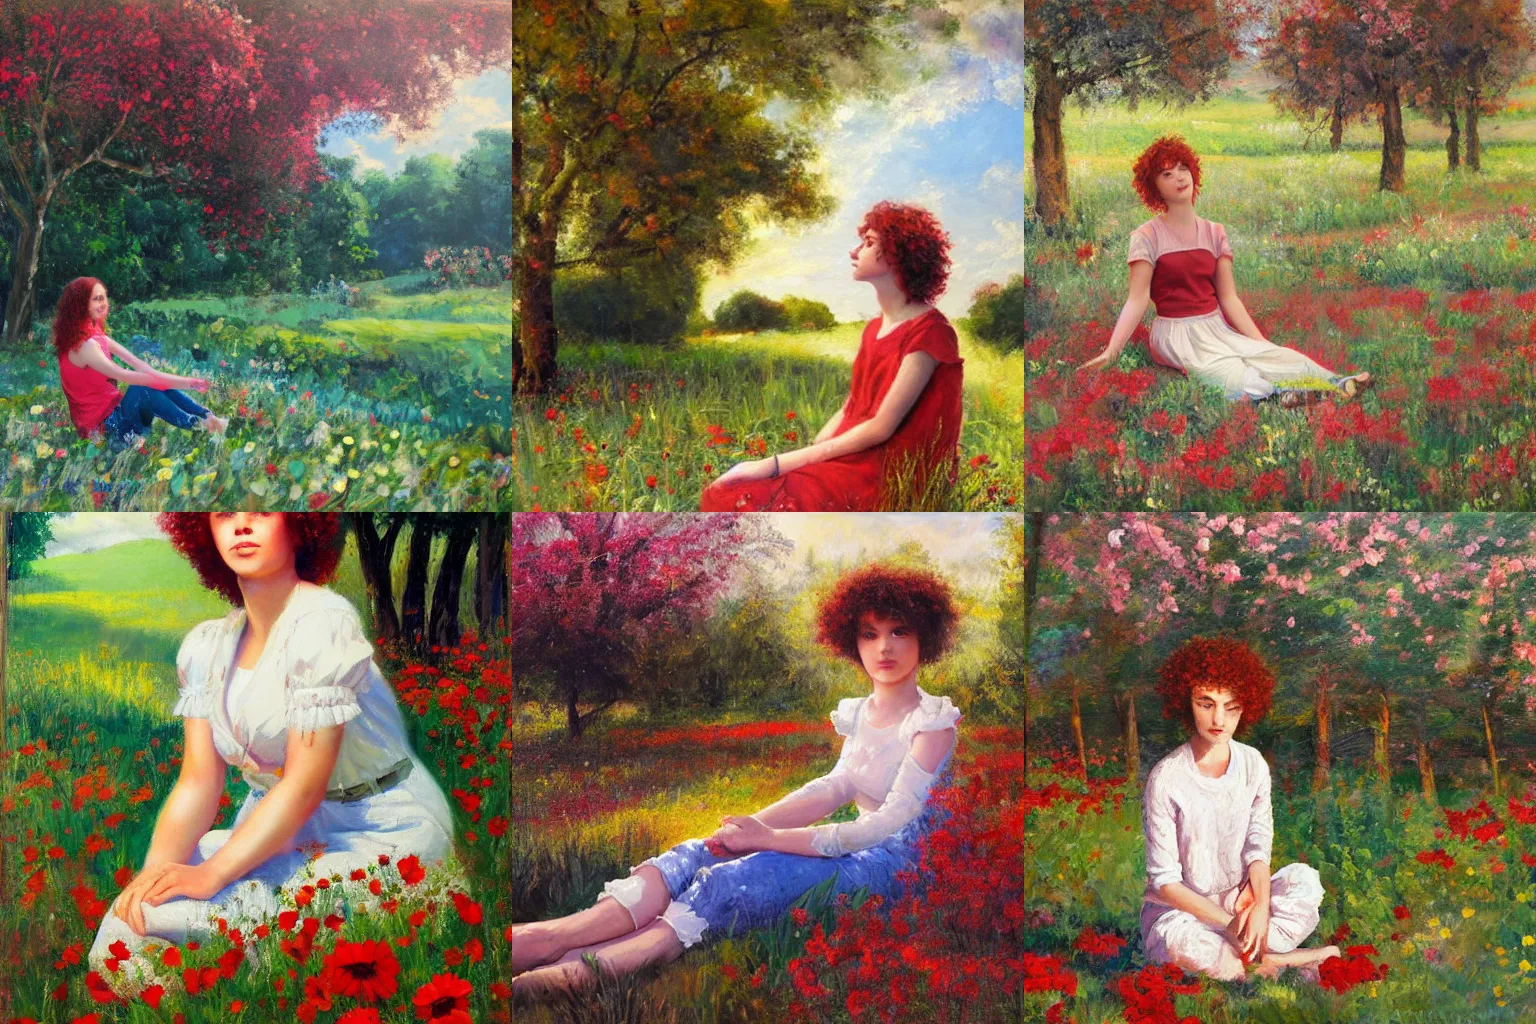 Prompt: a cute girl with short curly red hair sitting in a field of flowers, god rays are passing through the trees in the background, oil painting